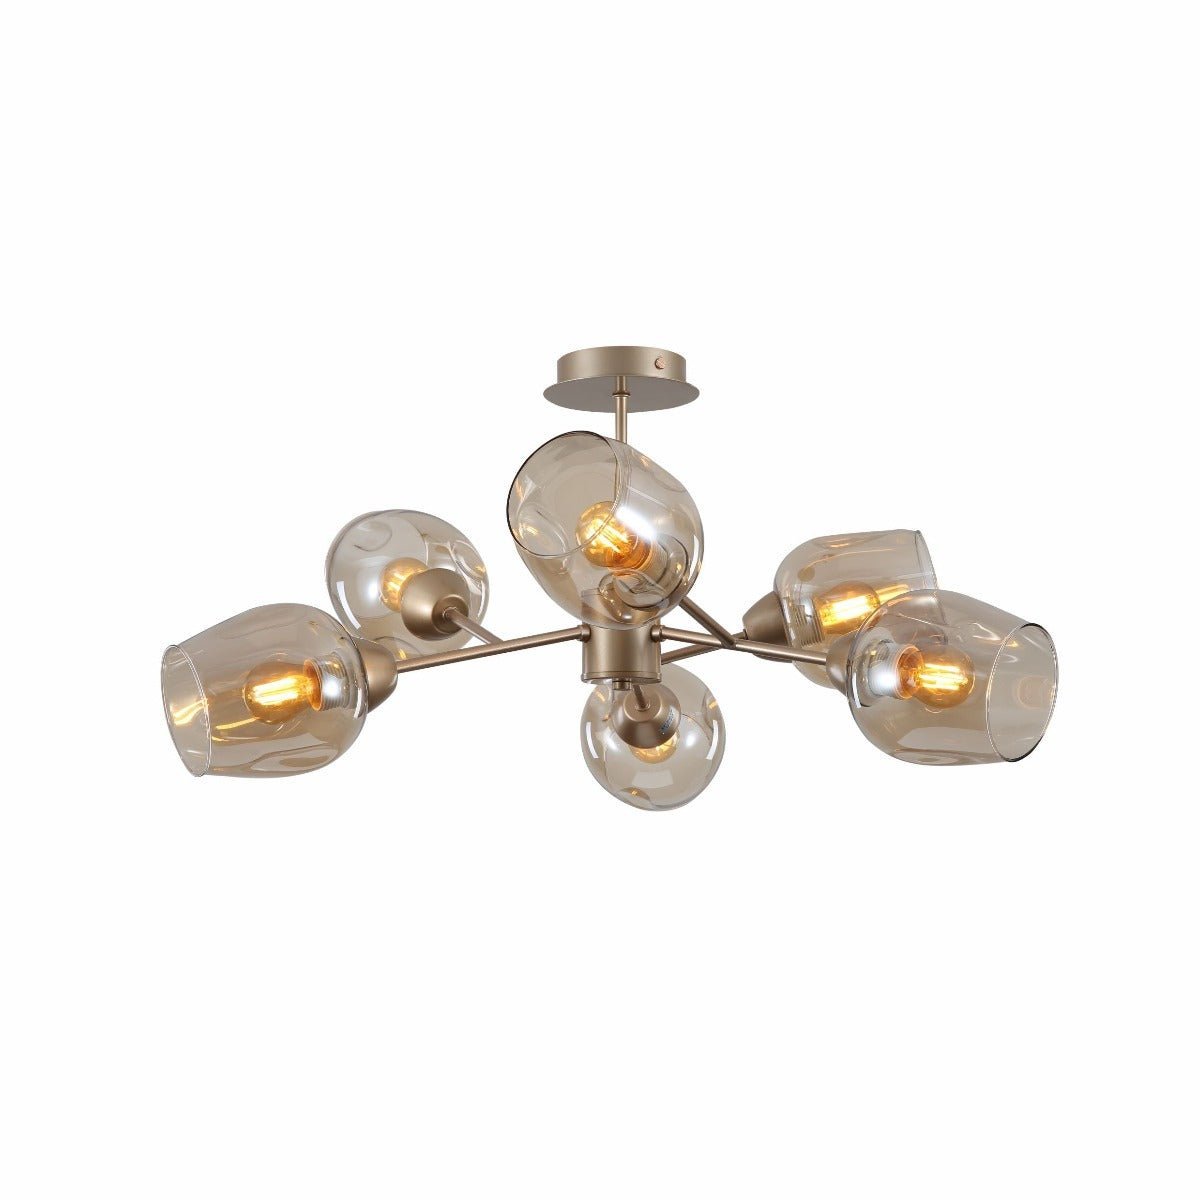 Main image of Amber Glass Metalic Gold Branch Twig Semi Flush Modern Ceiling Light with 6xE27 Fitting | TEKLED 159-17812